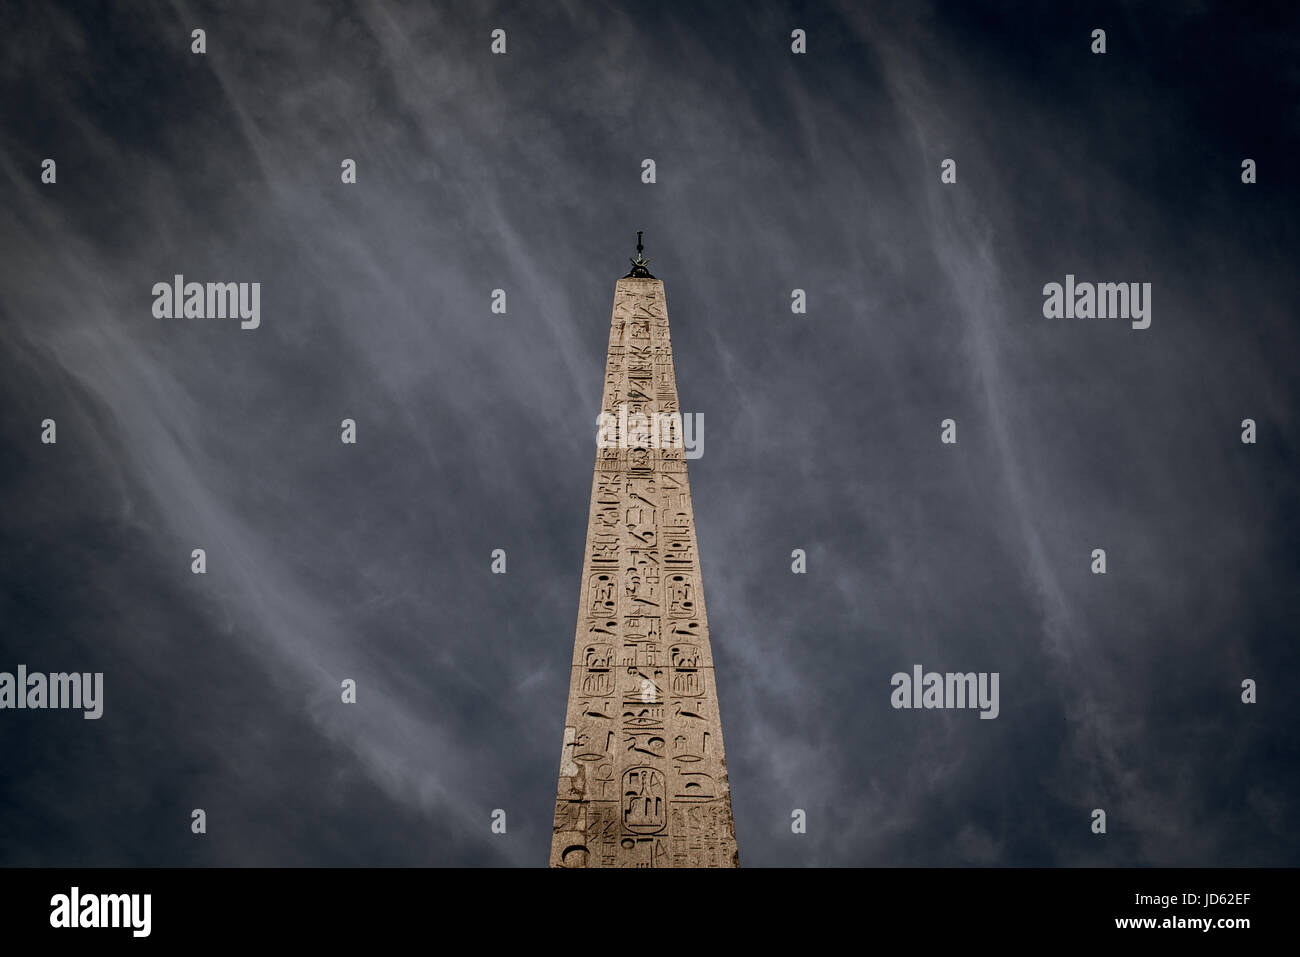 Famous old obelisk in piazza del popolo Rome, view from low angle dramatic sky Stock Photo